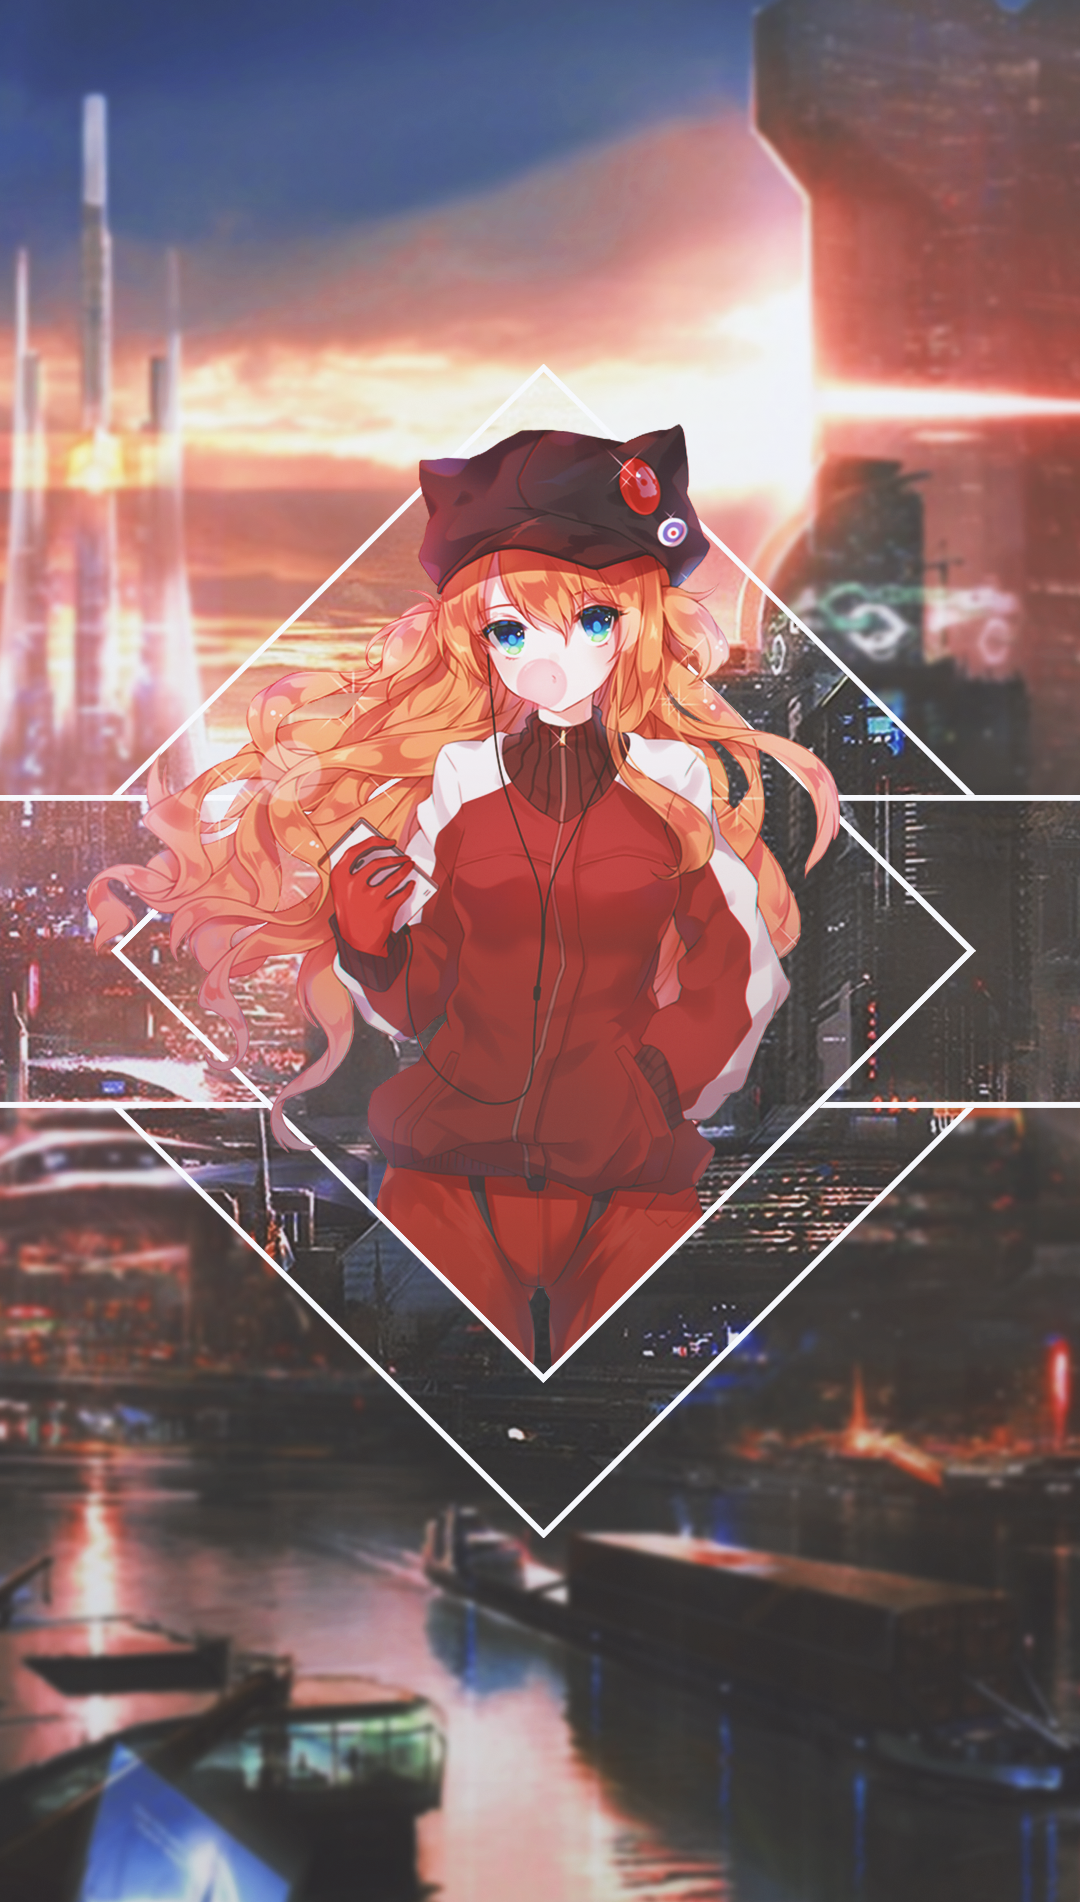 Anime 1080x1902 anime anime girls picture-in-picture blue eyes Neon Genesis Evangelion Asuka Langley Soryu